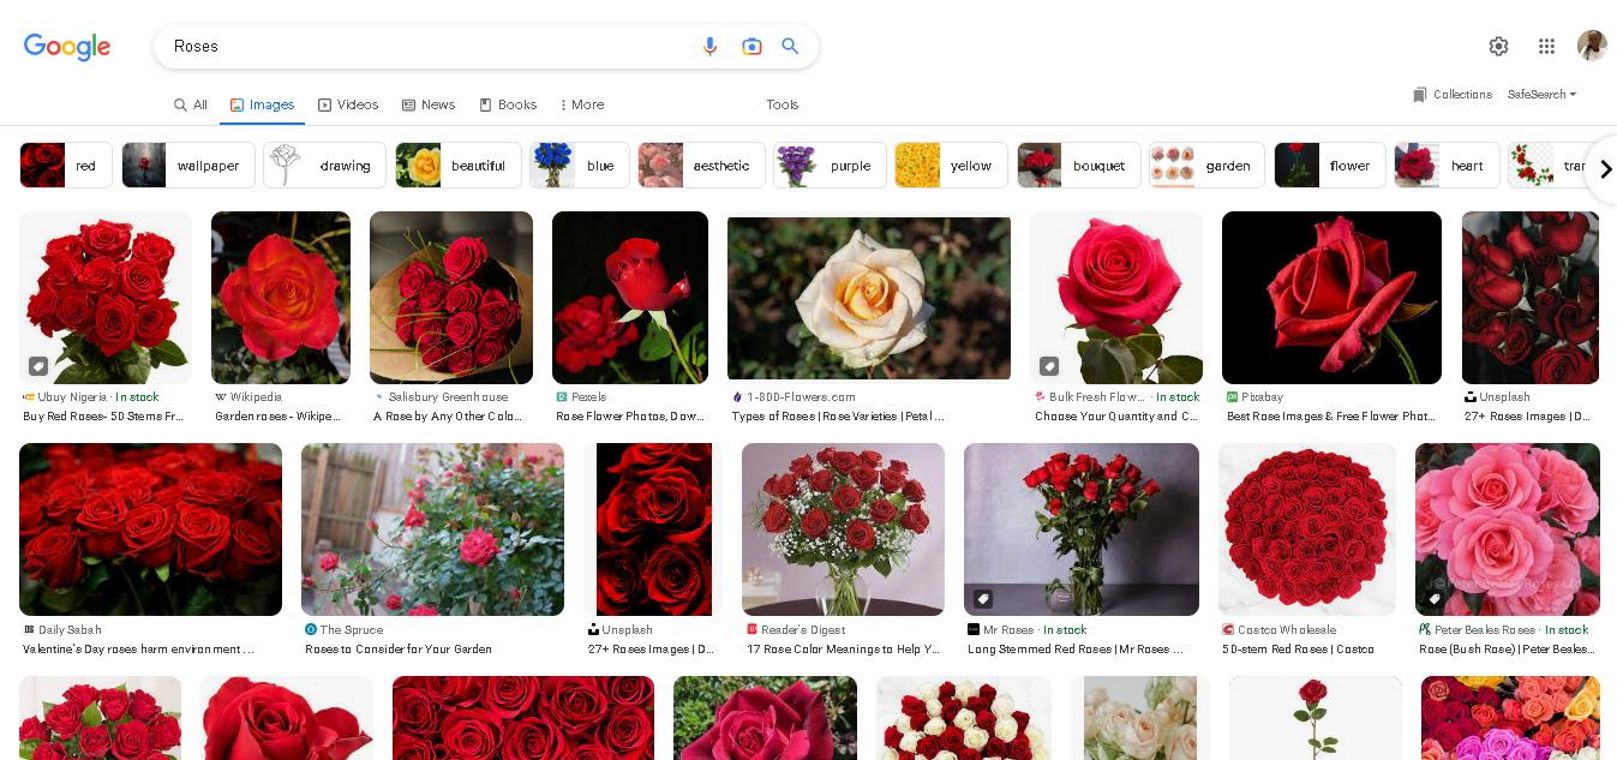 Screenshot showing results page using a cross search with images